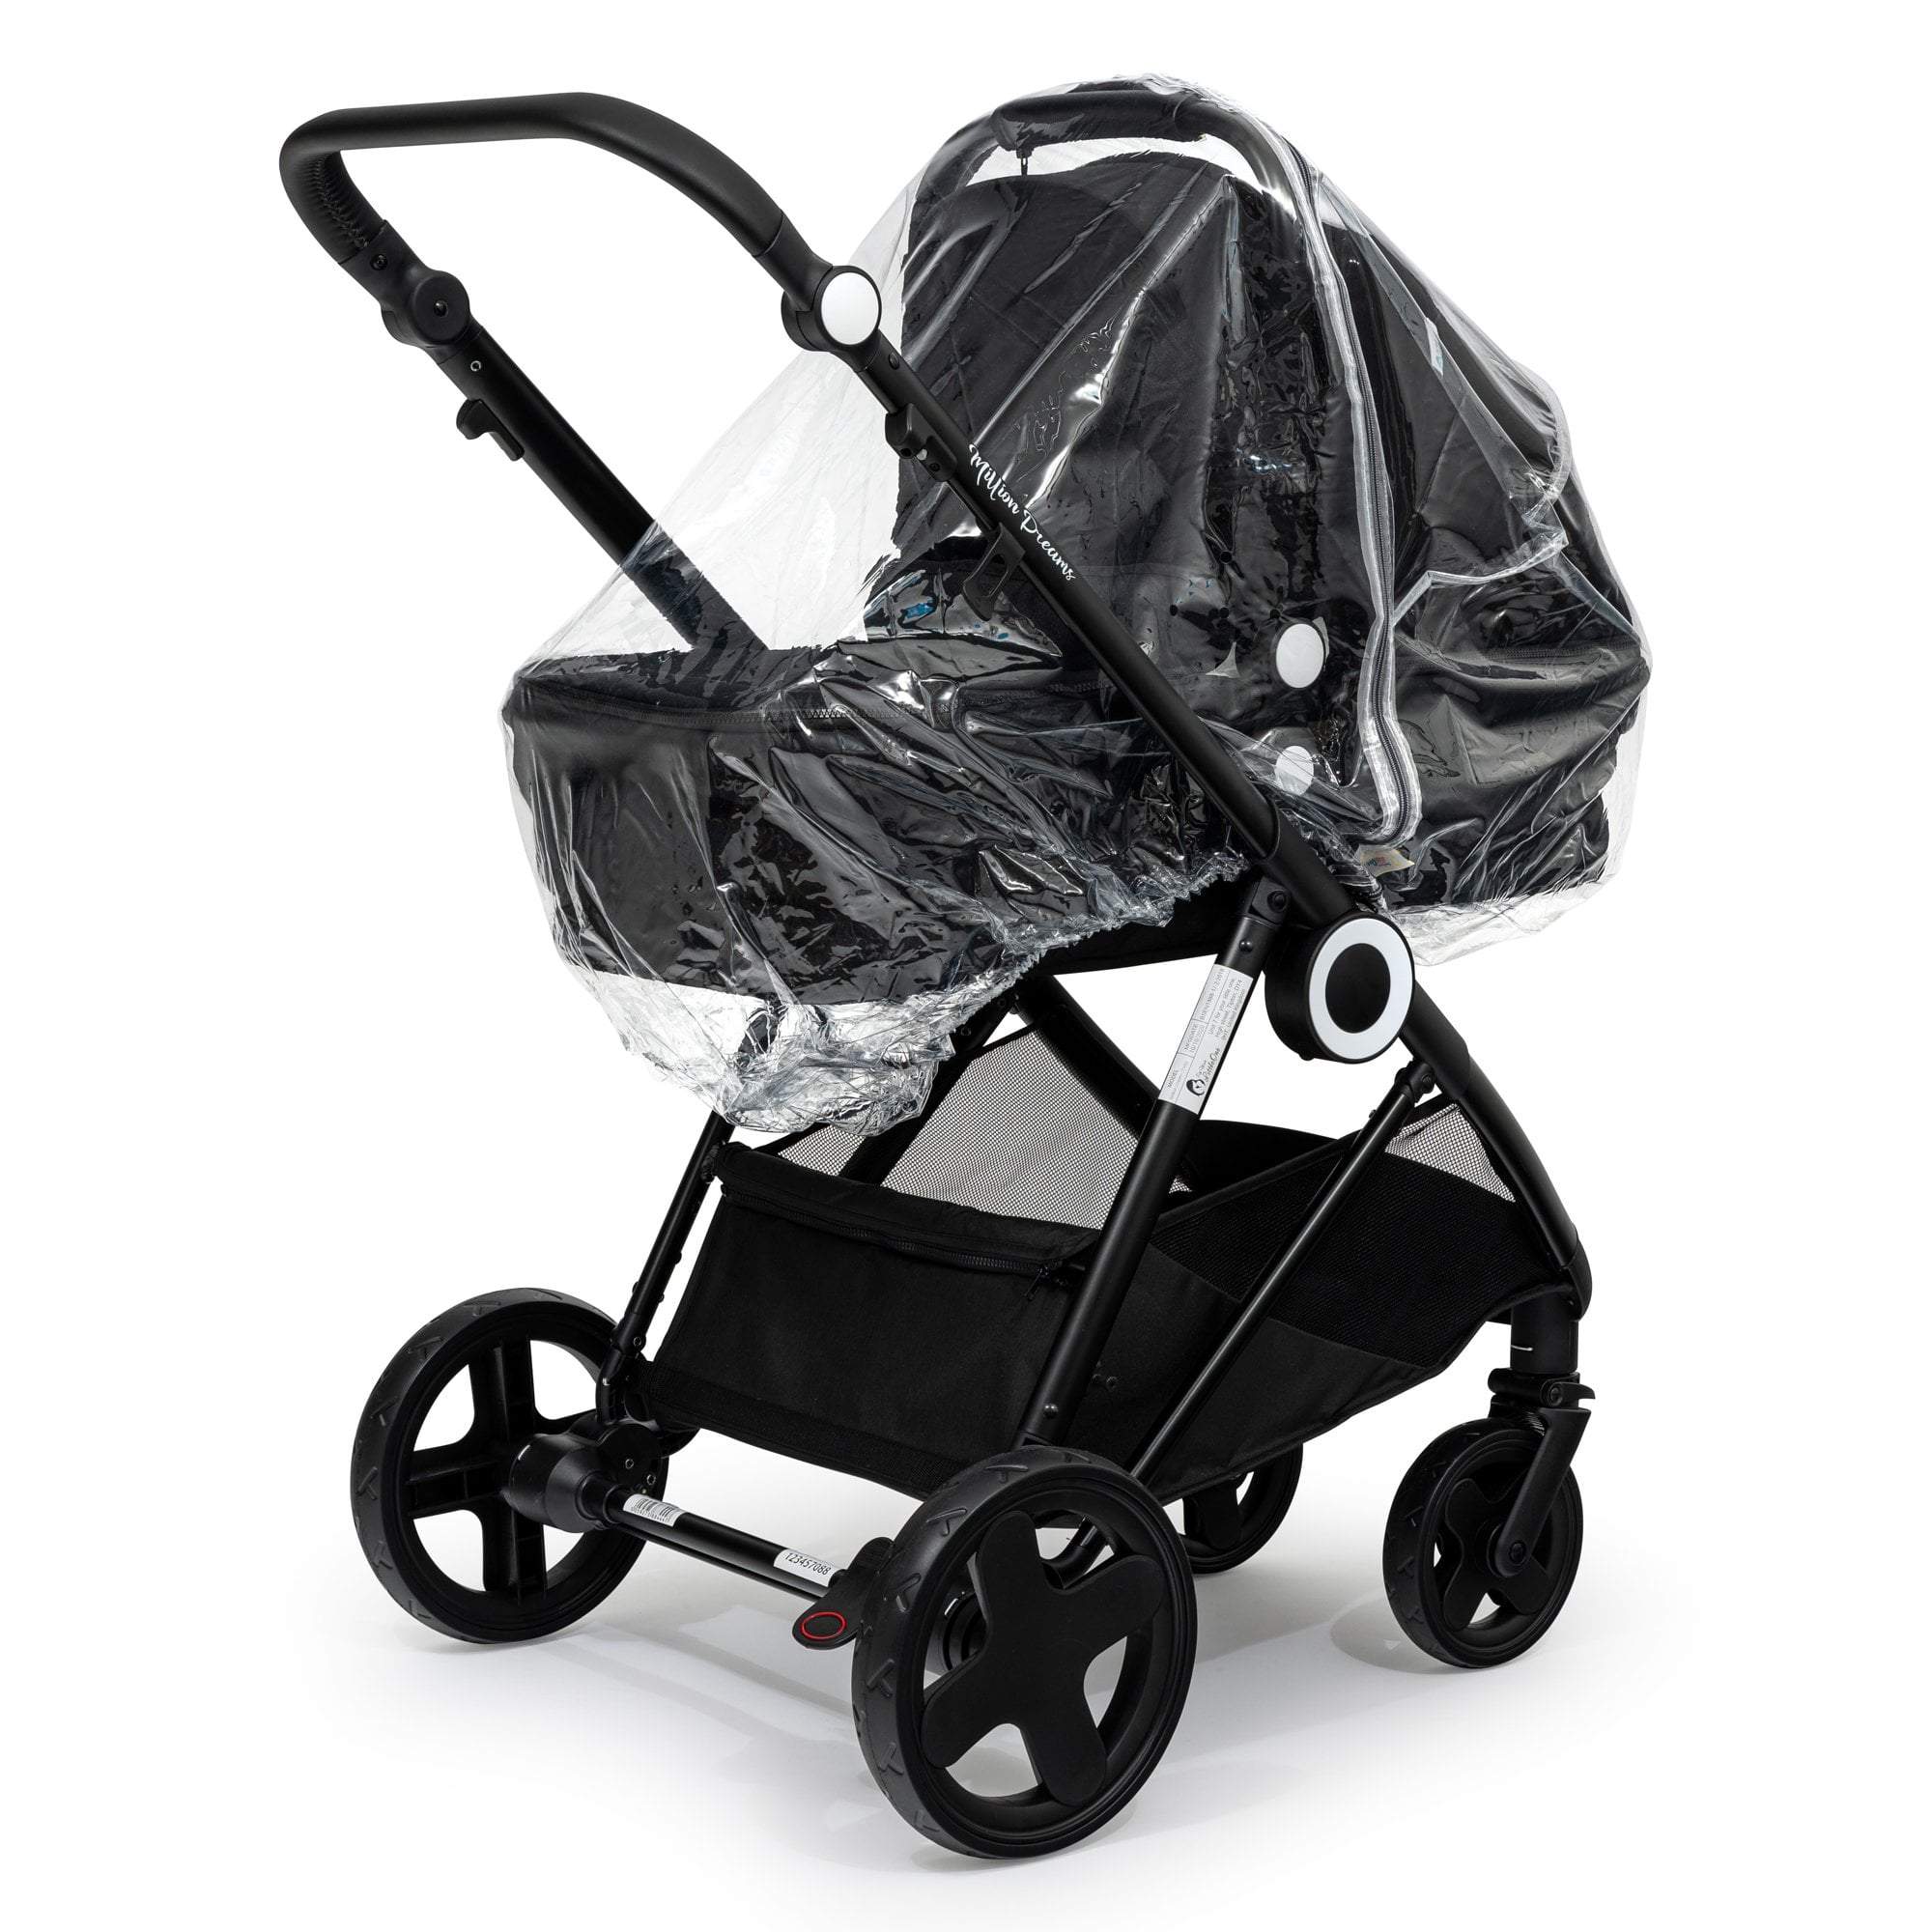 Carrycot Raincover Compatible With Chicco - Fits All Models - For Your Little One